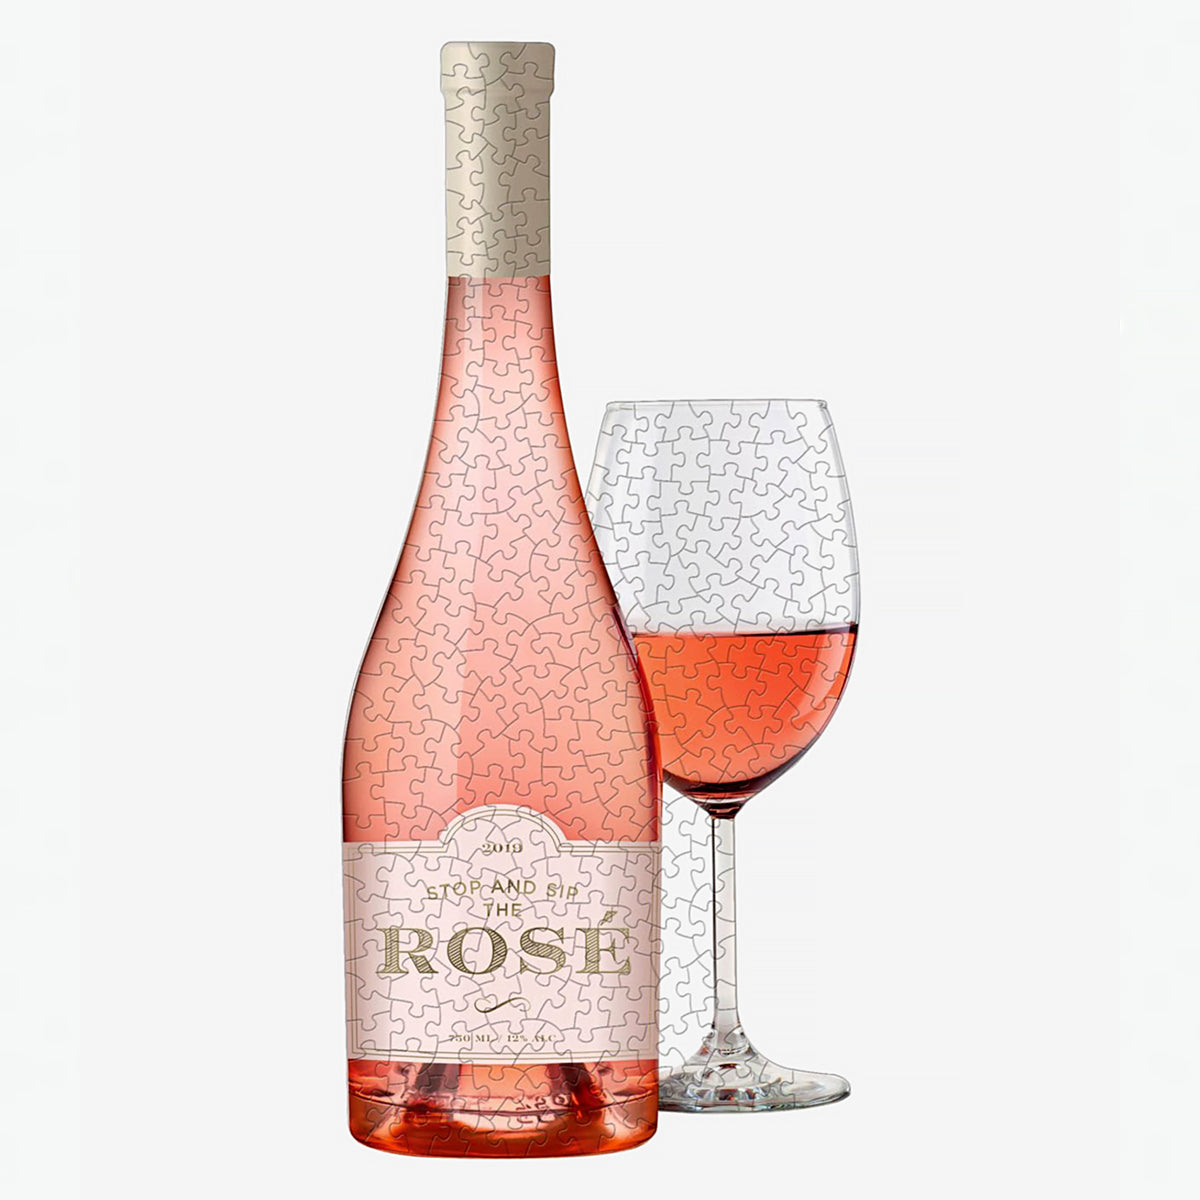 Did you manage to stay sober this Dry January? Celebrate with this novelty Rosé wine-shaped jigsaw puzzle gift.